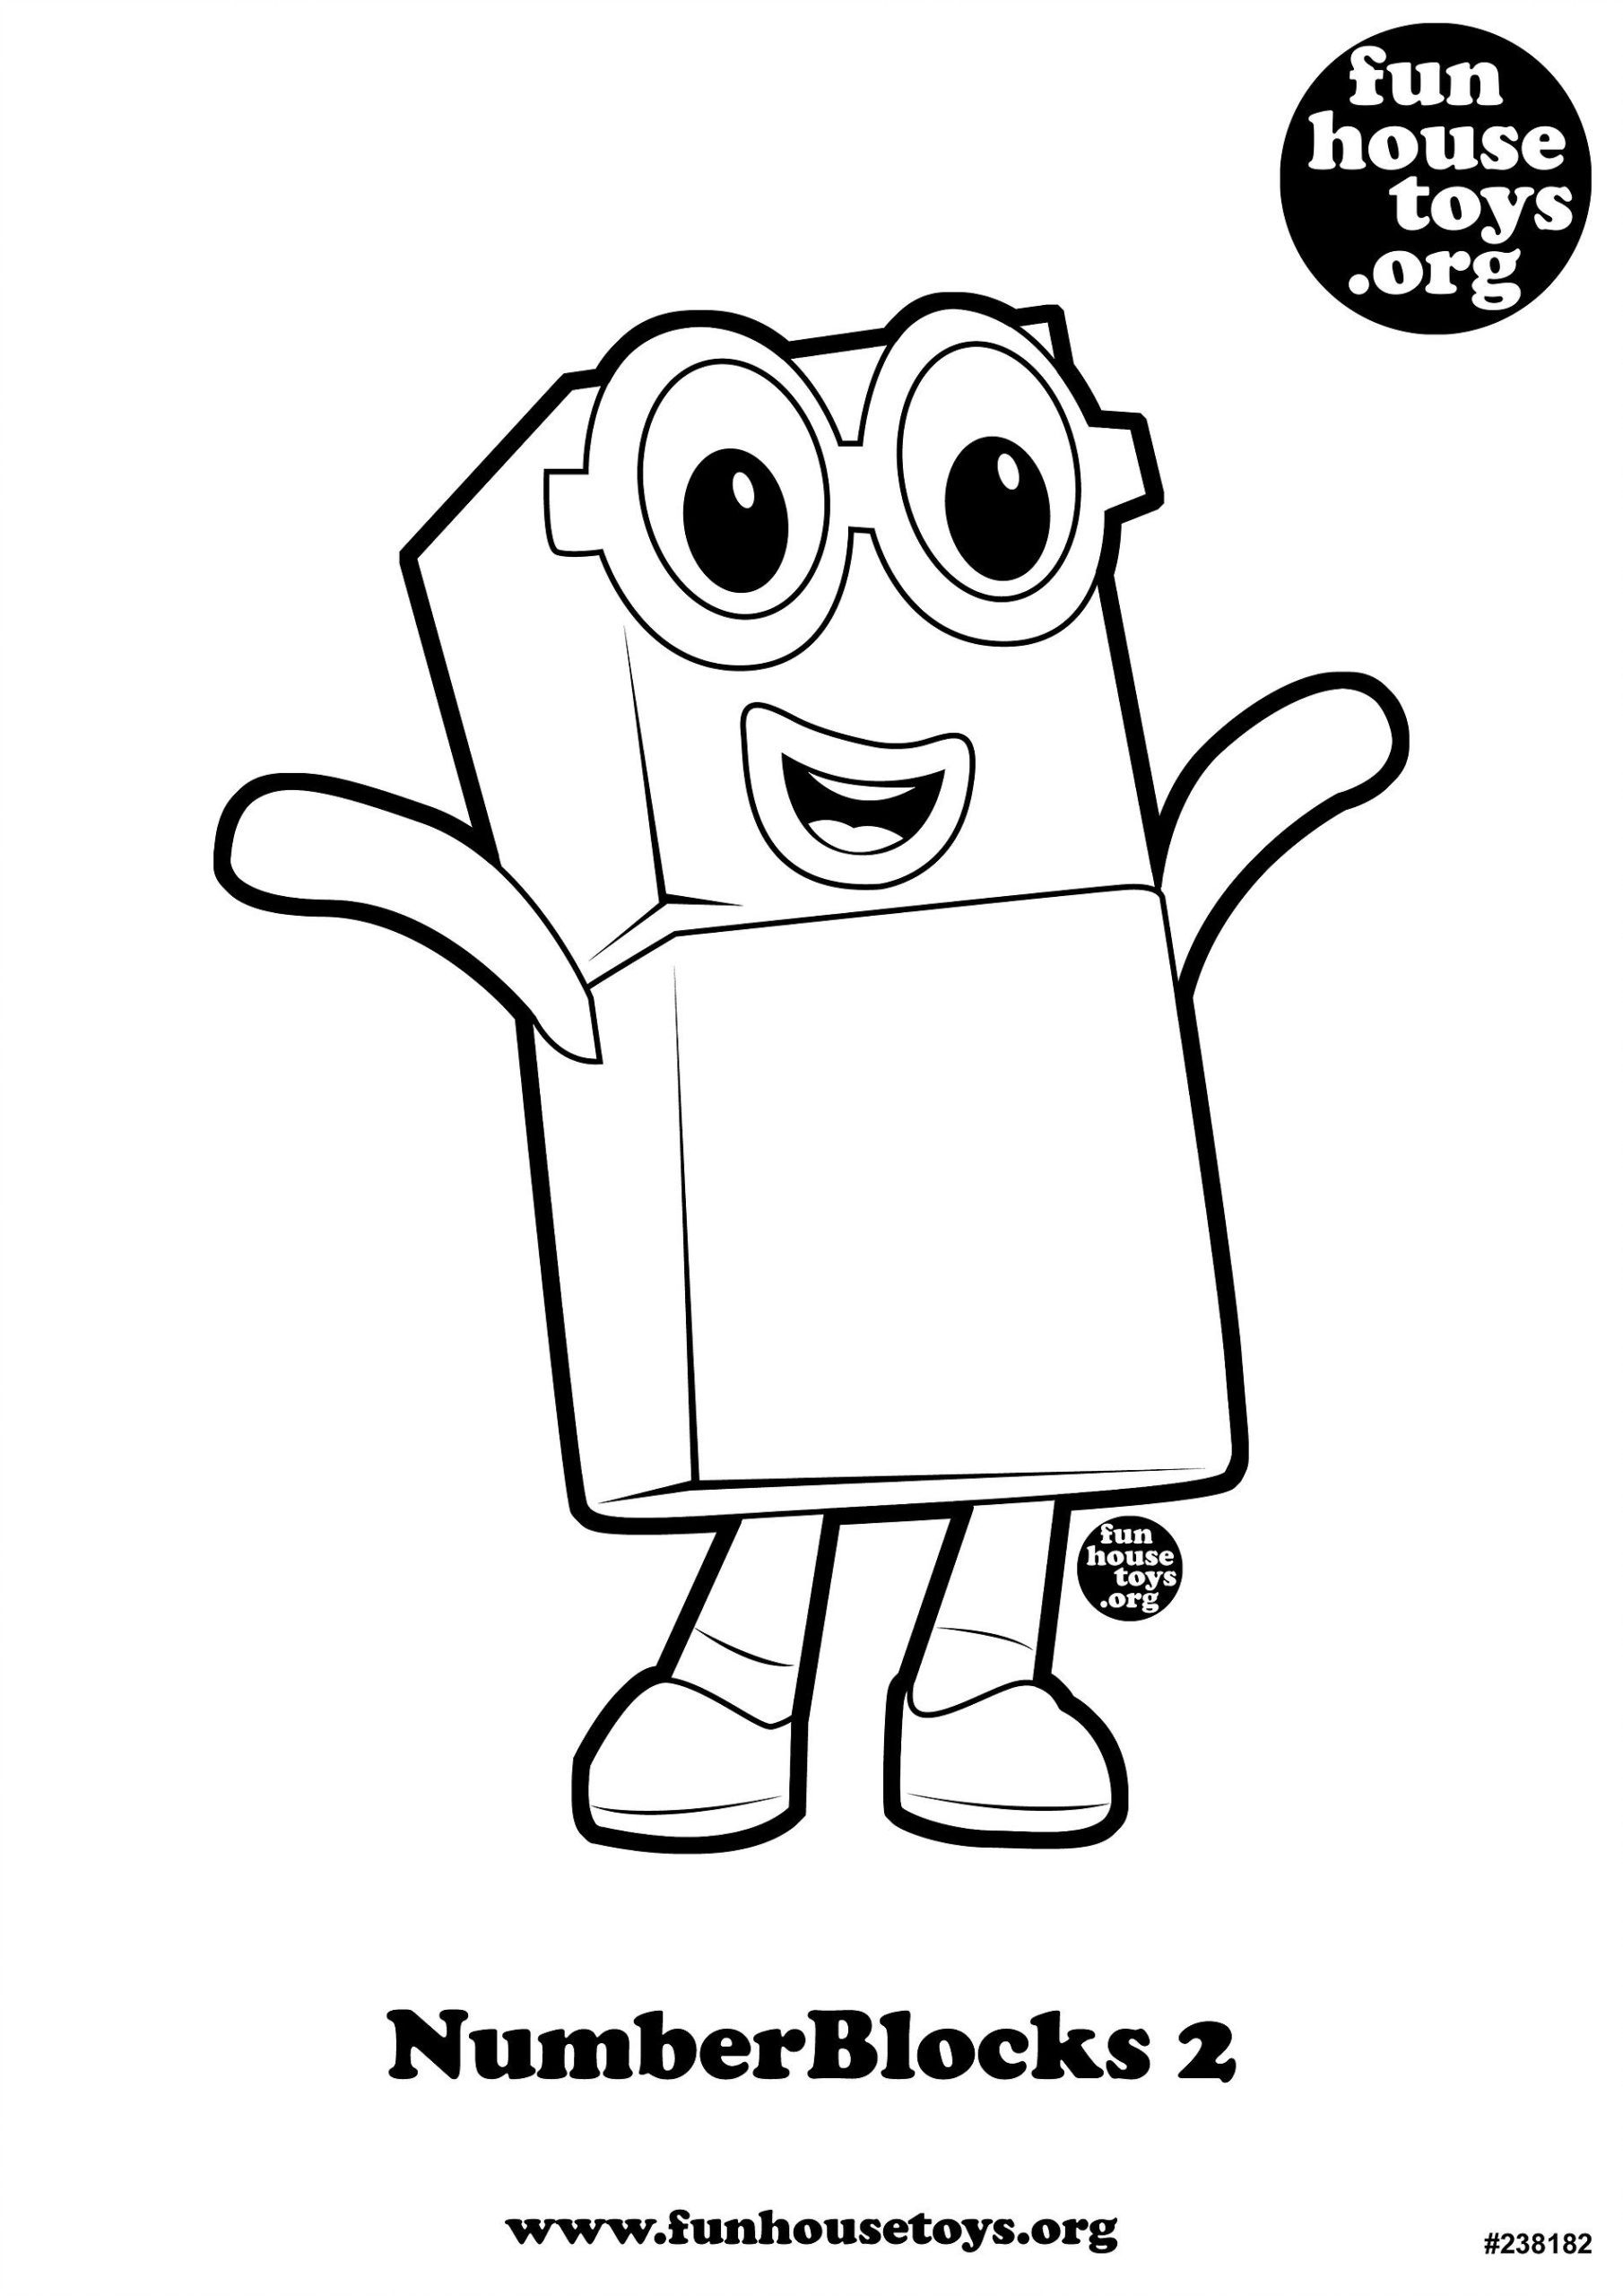 FUN HOUSE TOYS Numberblocks 2 Coloring Pages 